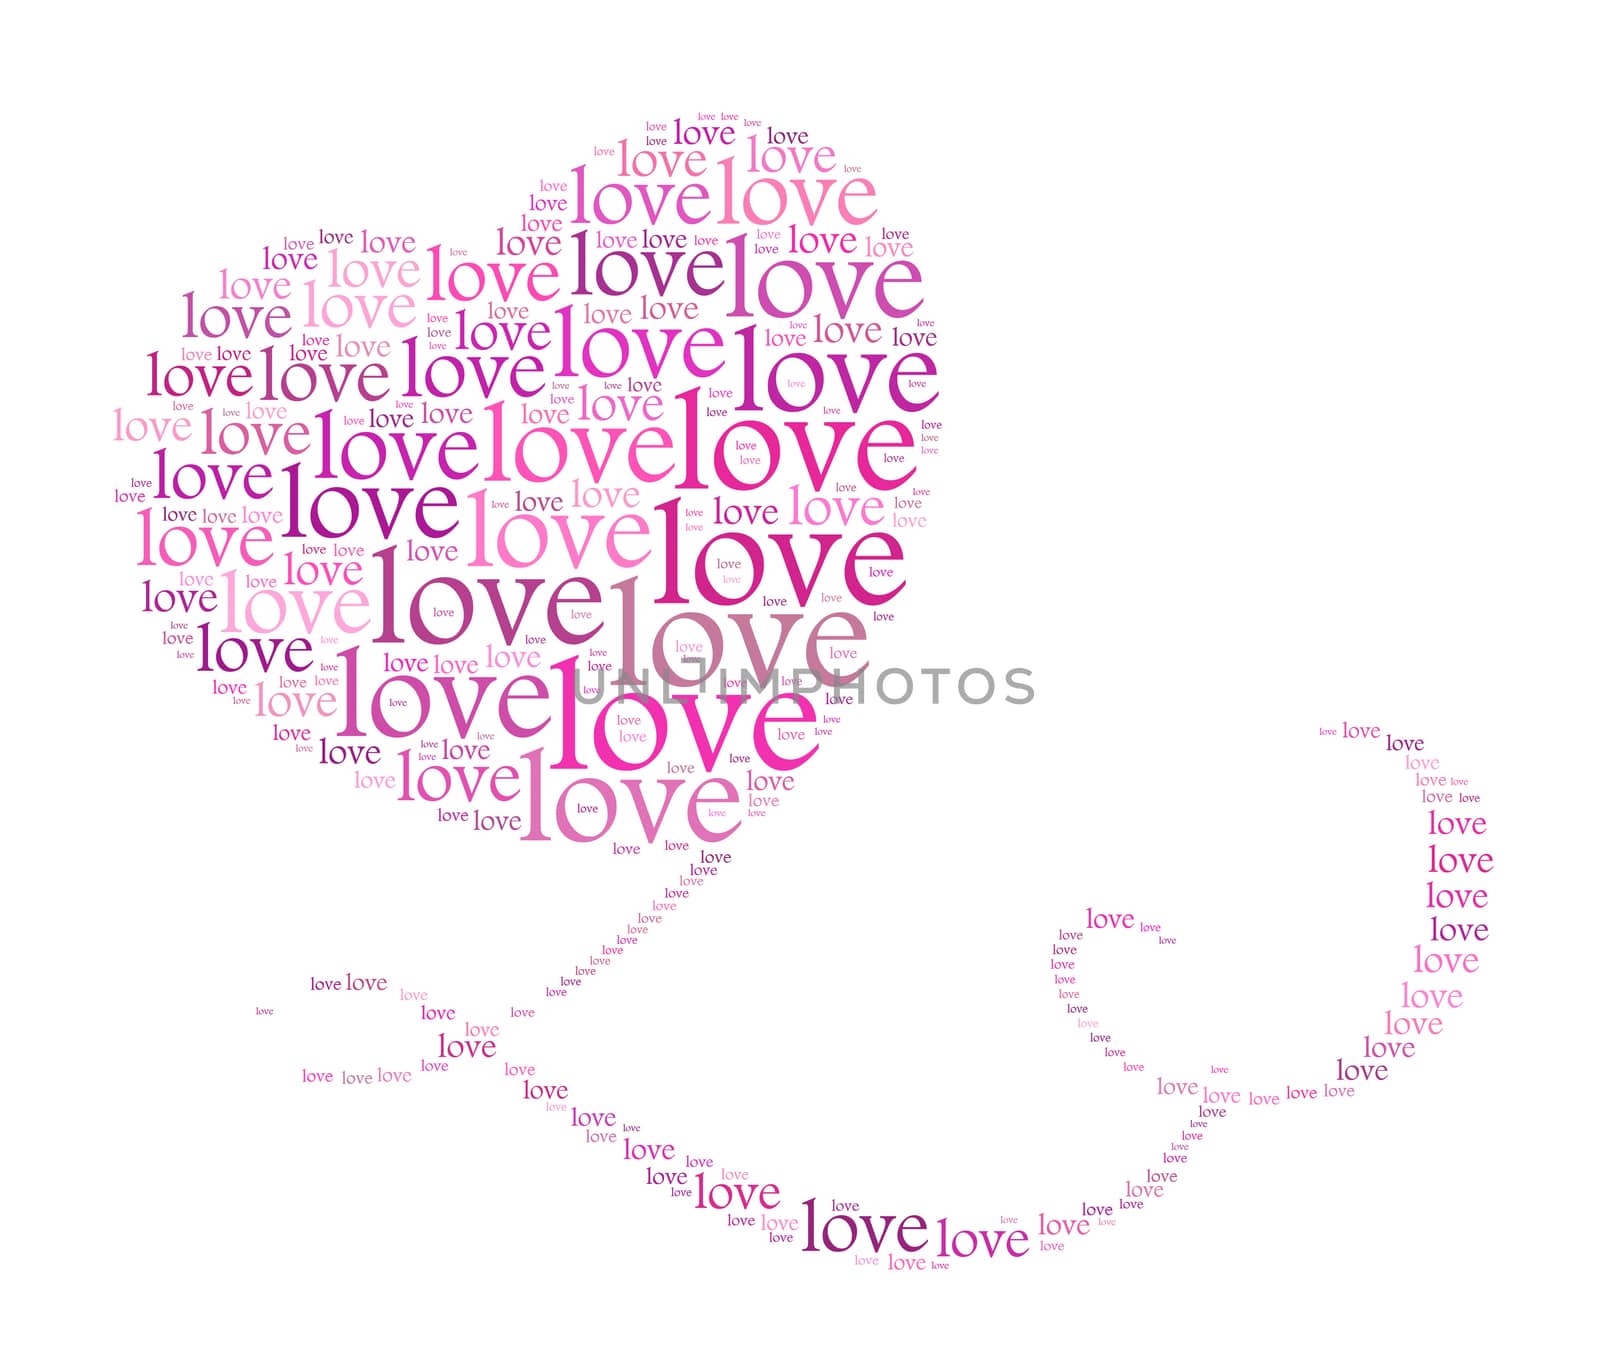 Valentines day card word cloud concept by eenevski